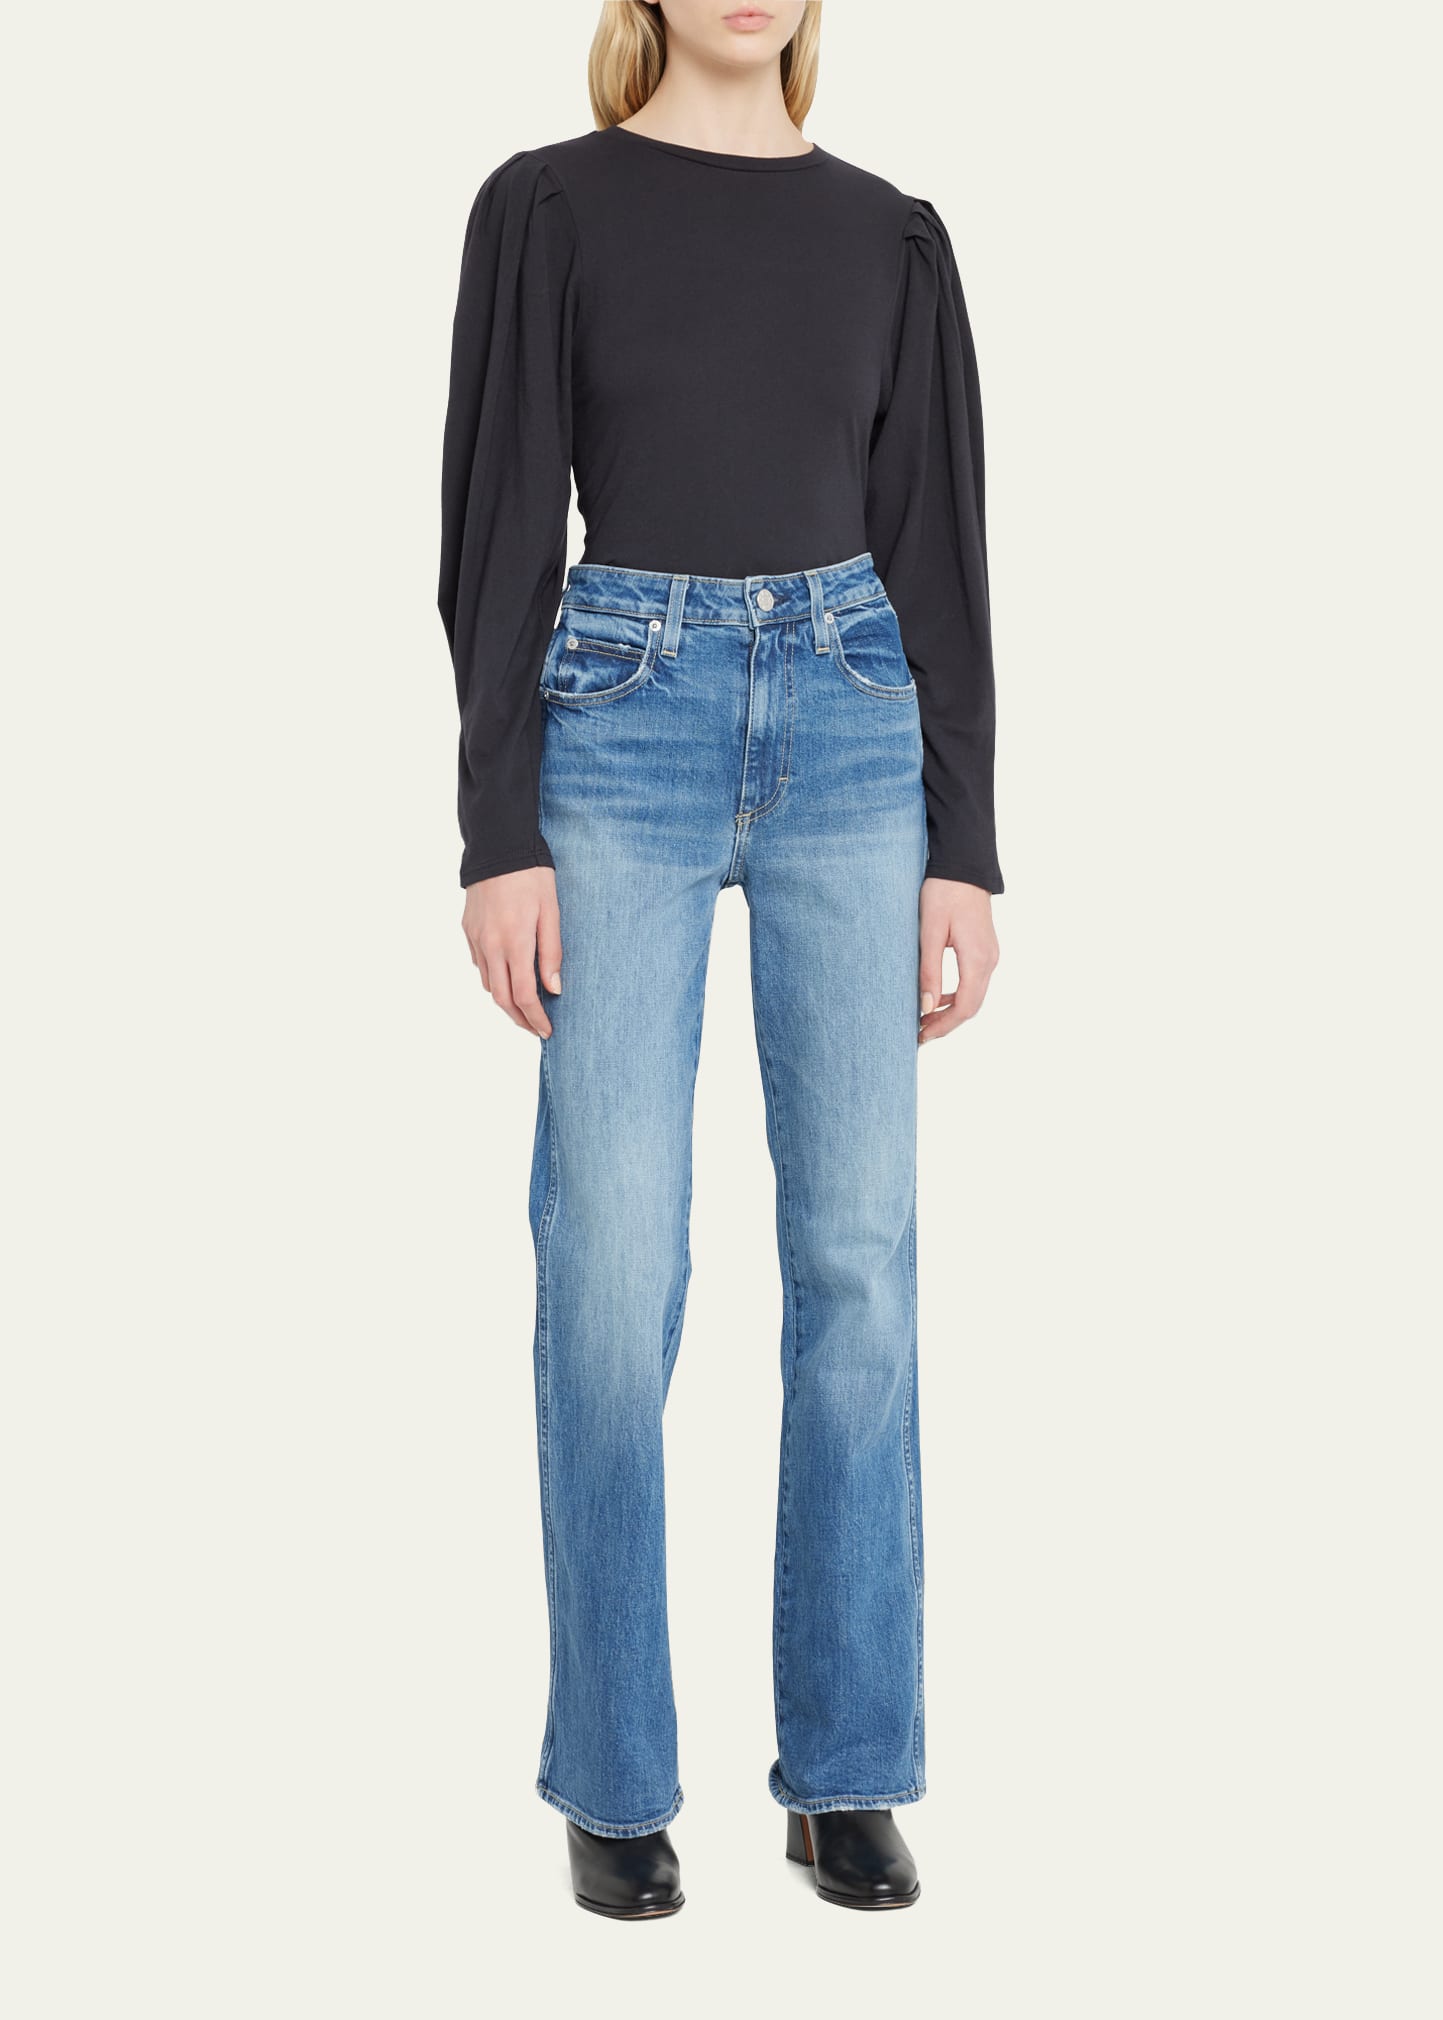 Amo Denim The High Rise Kick Flare Jeans In Patience